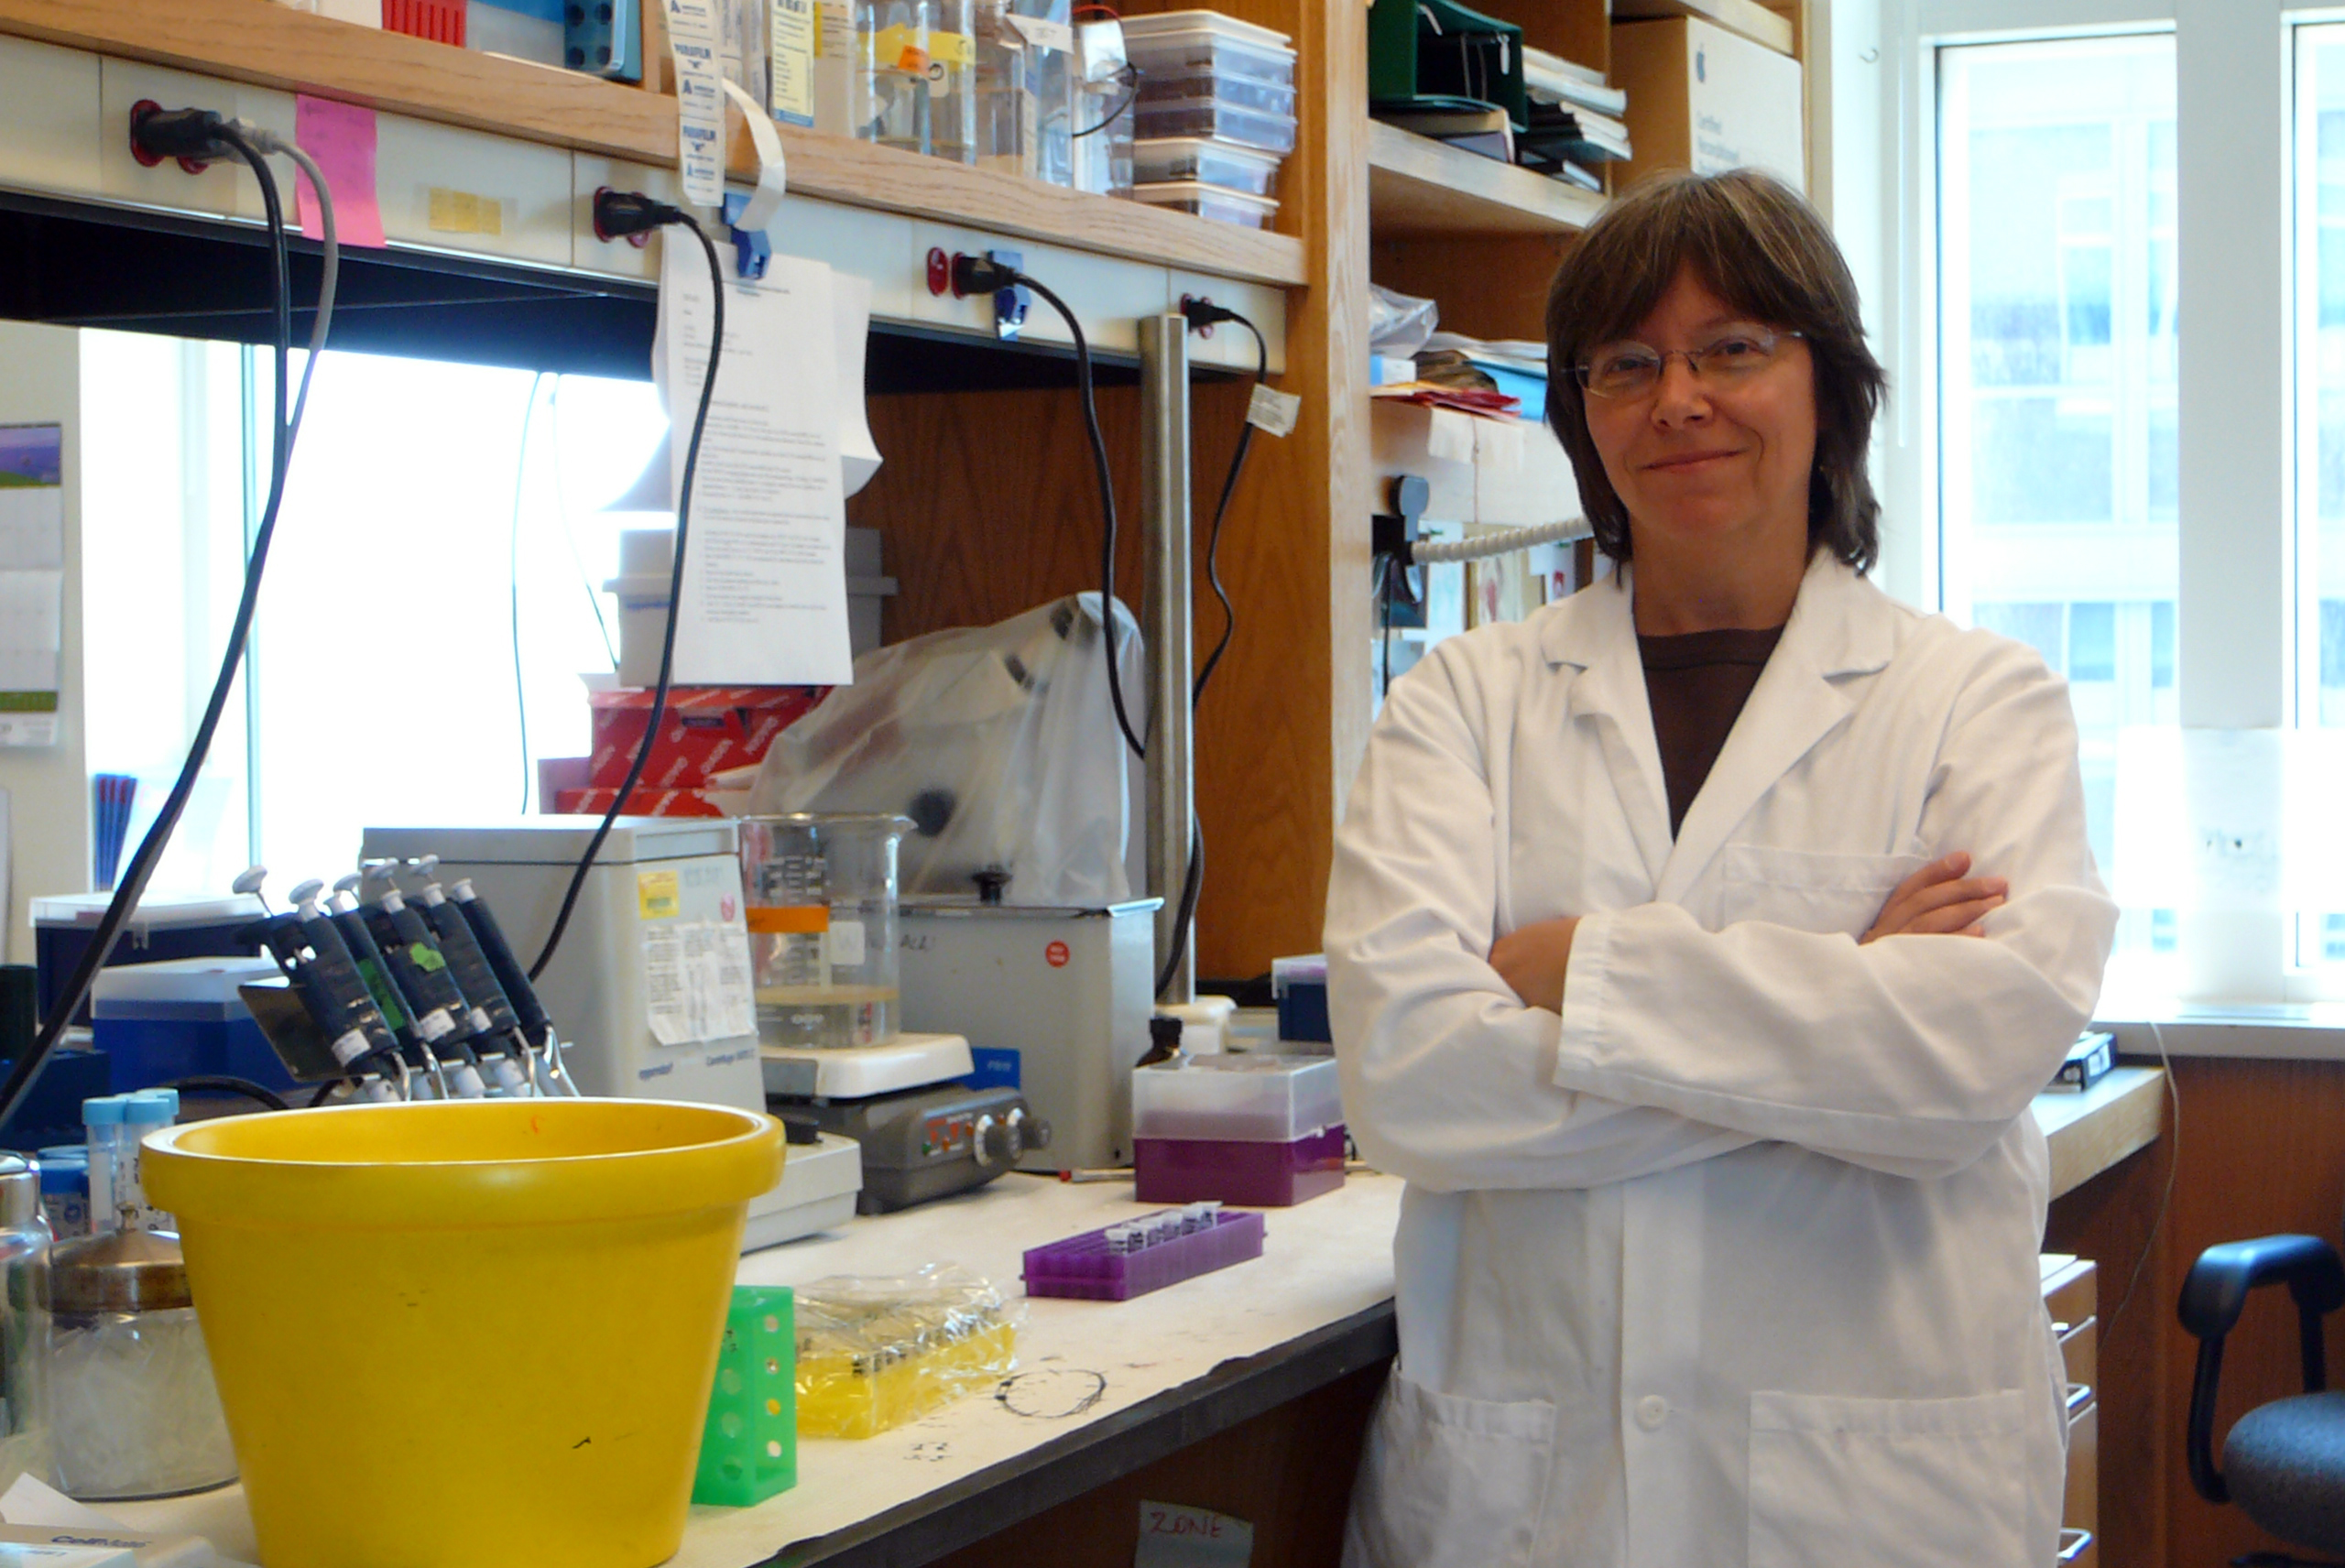 In a laboratory, a woman in a white lab coat and glasses smiles at the camera